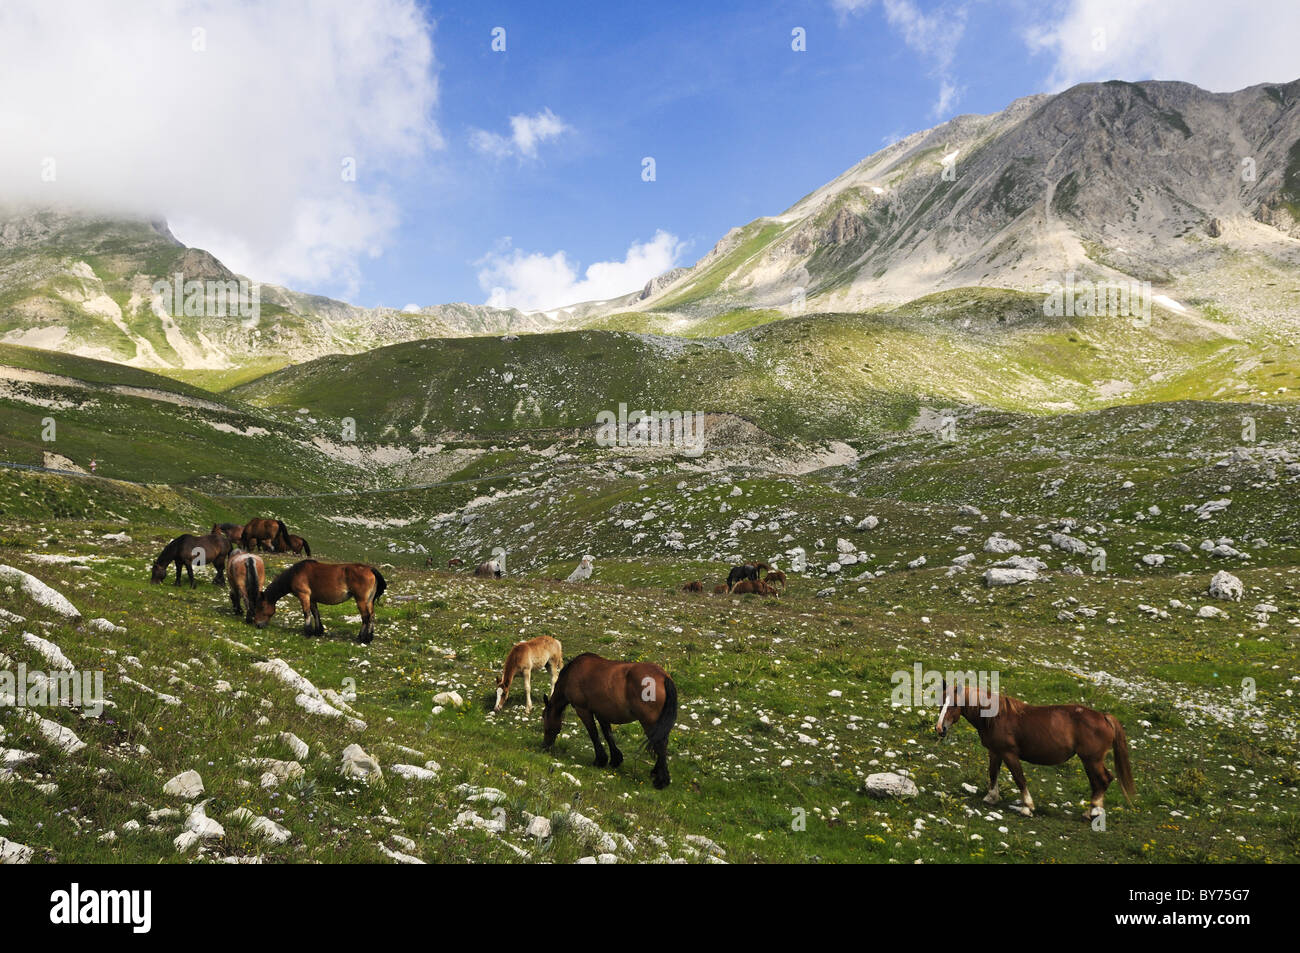 Savaged horses grazing in the mountains, Transhumanz, Campo Imperatore, Gran Sasso National Park, Abruzzi, Italy, Europe Stock Photo